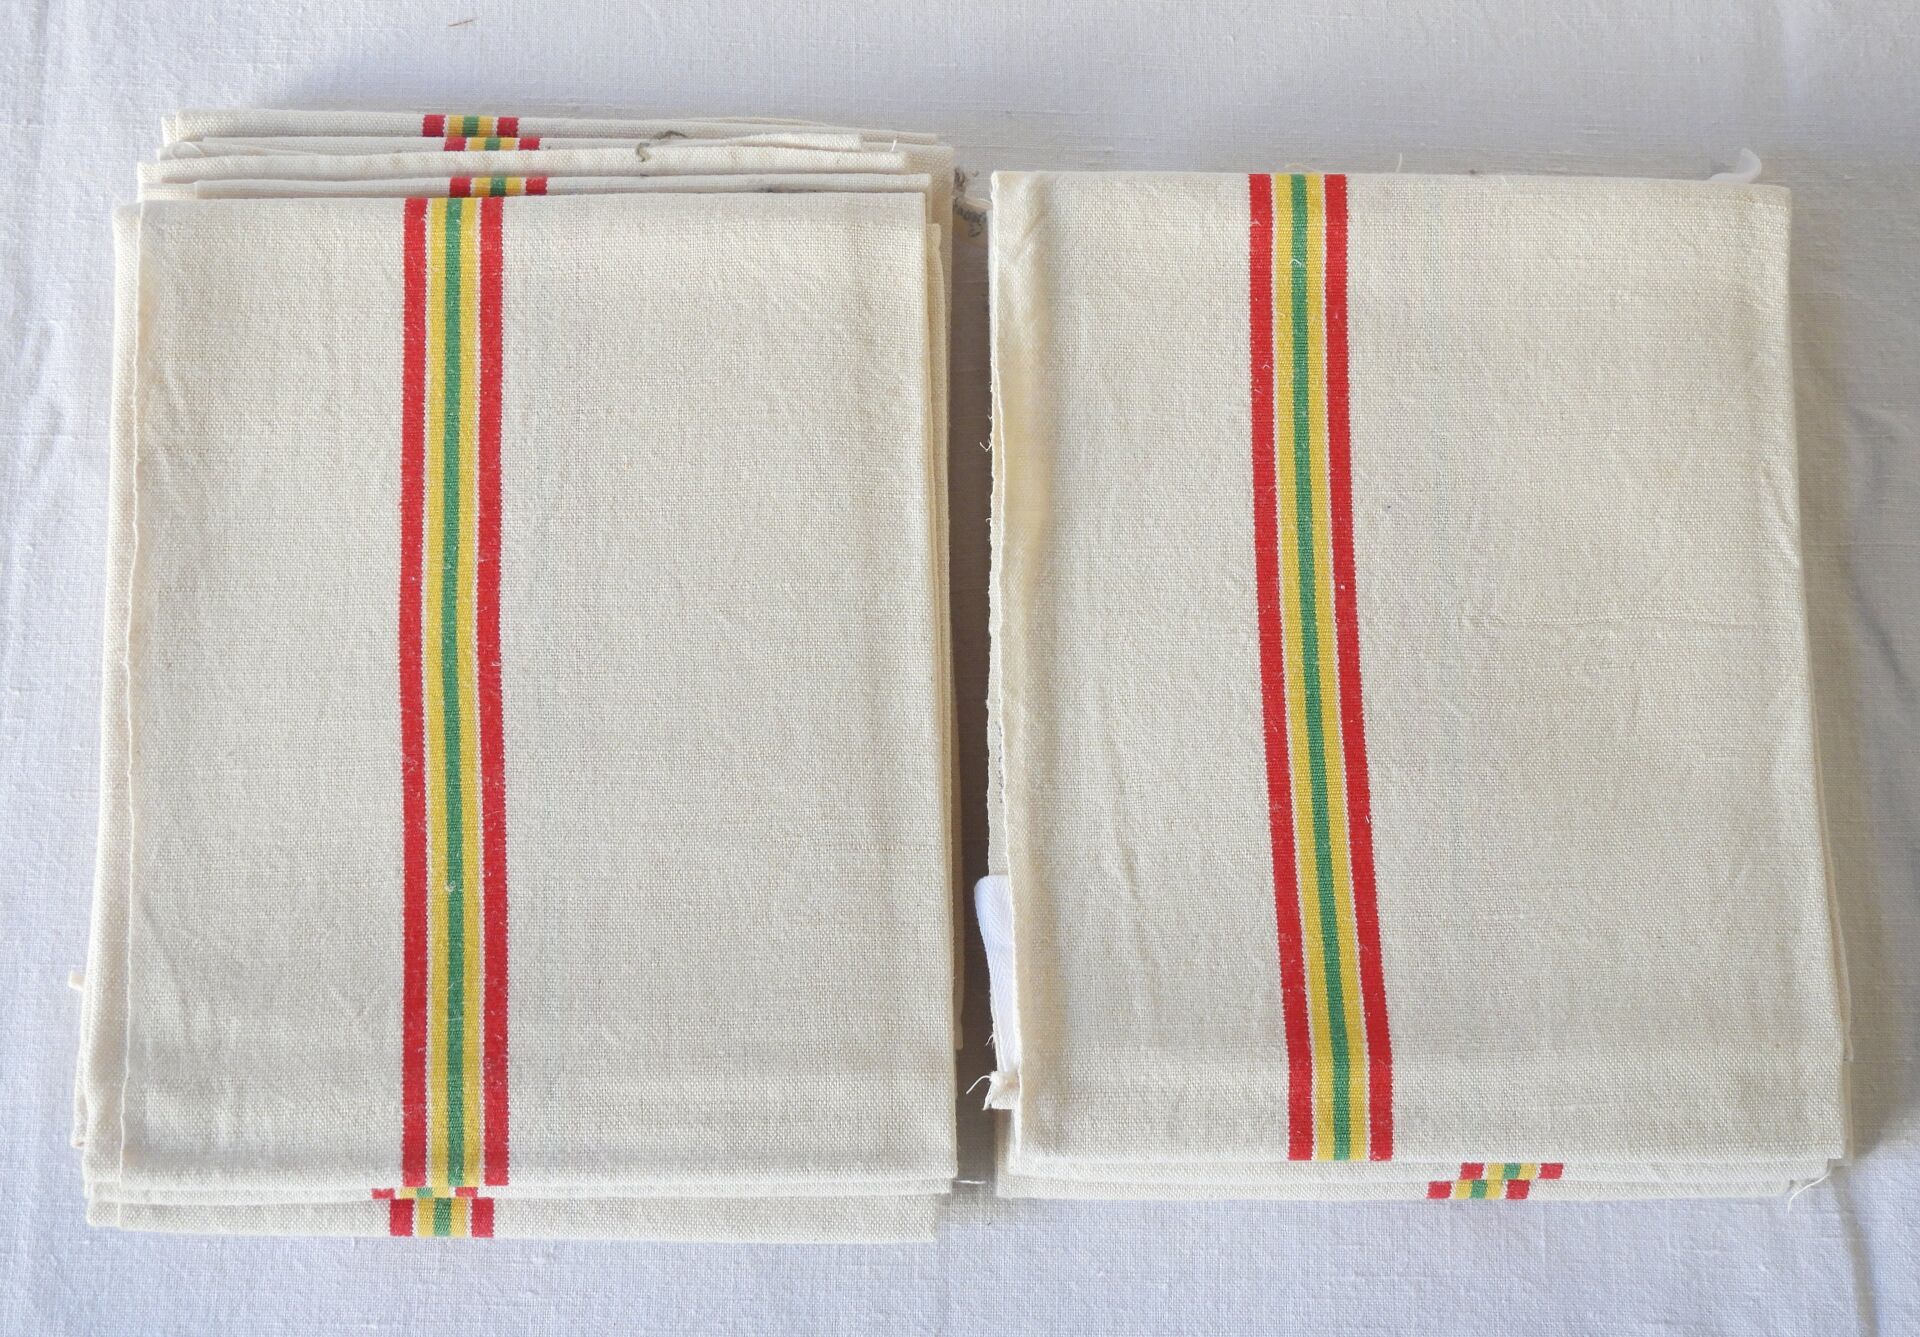 Null Ten Yellow - Green - Red striped tea towels.